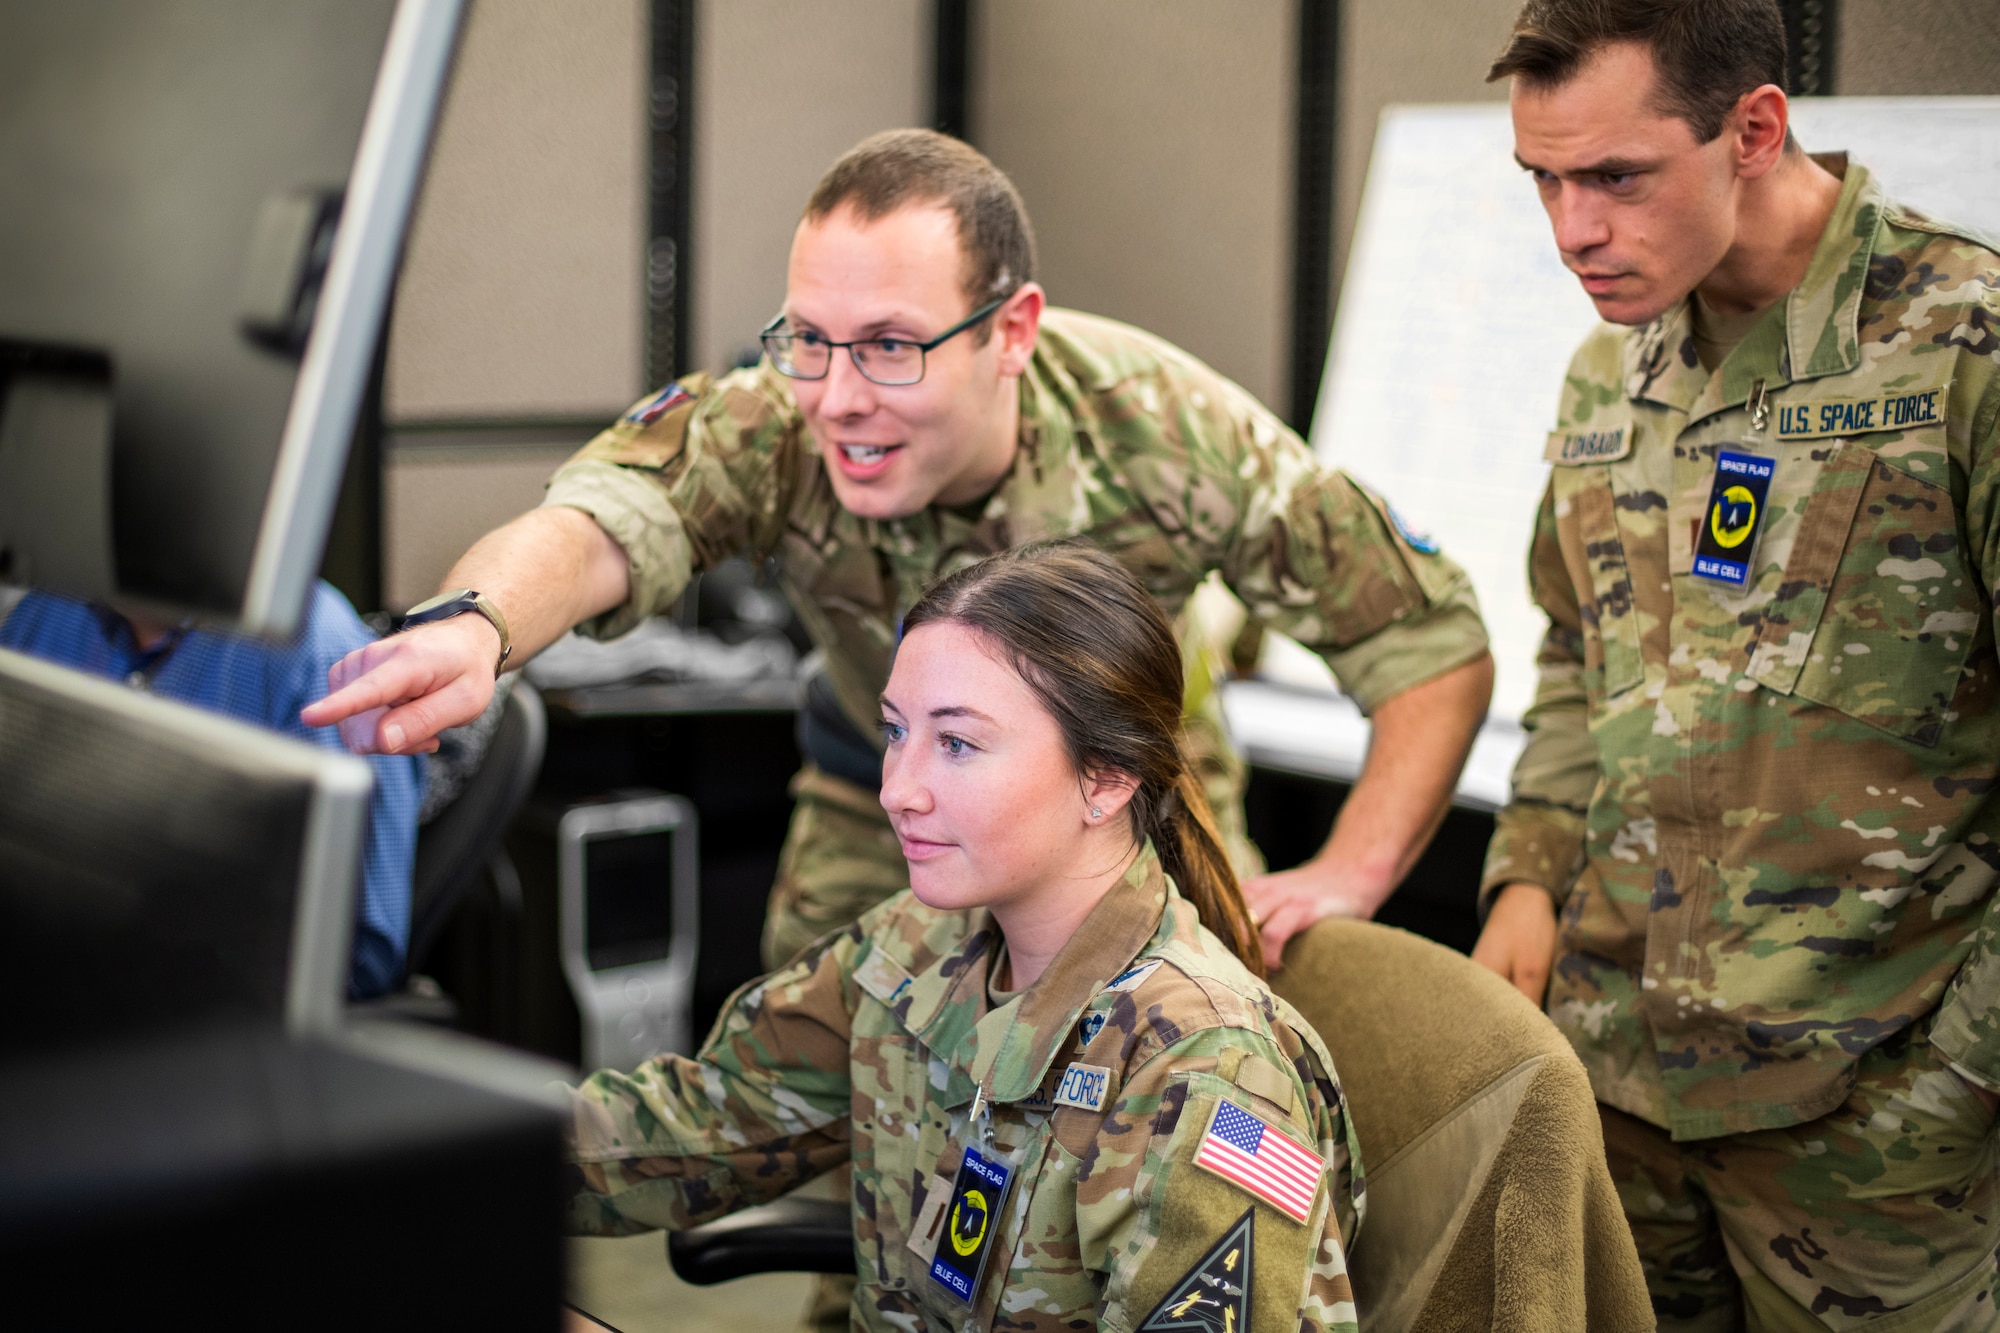 U.S. Space Force Guardians and a service member from the Royal Air Force work together during SPACE FLAG 23-2 at Schriever Space Force Base, Colorado, April 27, 2023. SPACE FLAG 23-2 was the largest exercise iteration to date, involving 250 participants. It was also the most complex integration of cyber warfare, the largest integration of coalition partners ever at a SPACE FLAG exercise, and the first SPACE FLAG exercise to feature live-fire space electronic warfare. (U.S. Space Force photo by Judi Tomich)